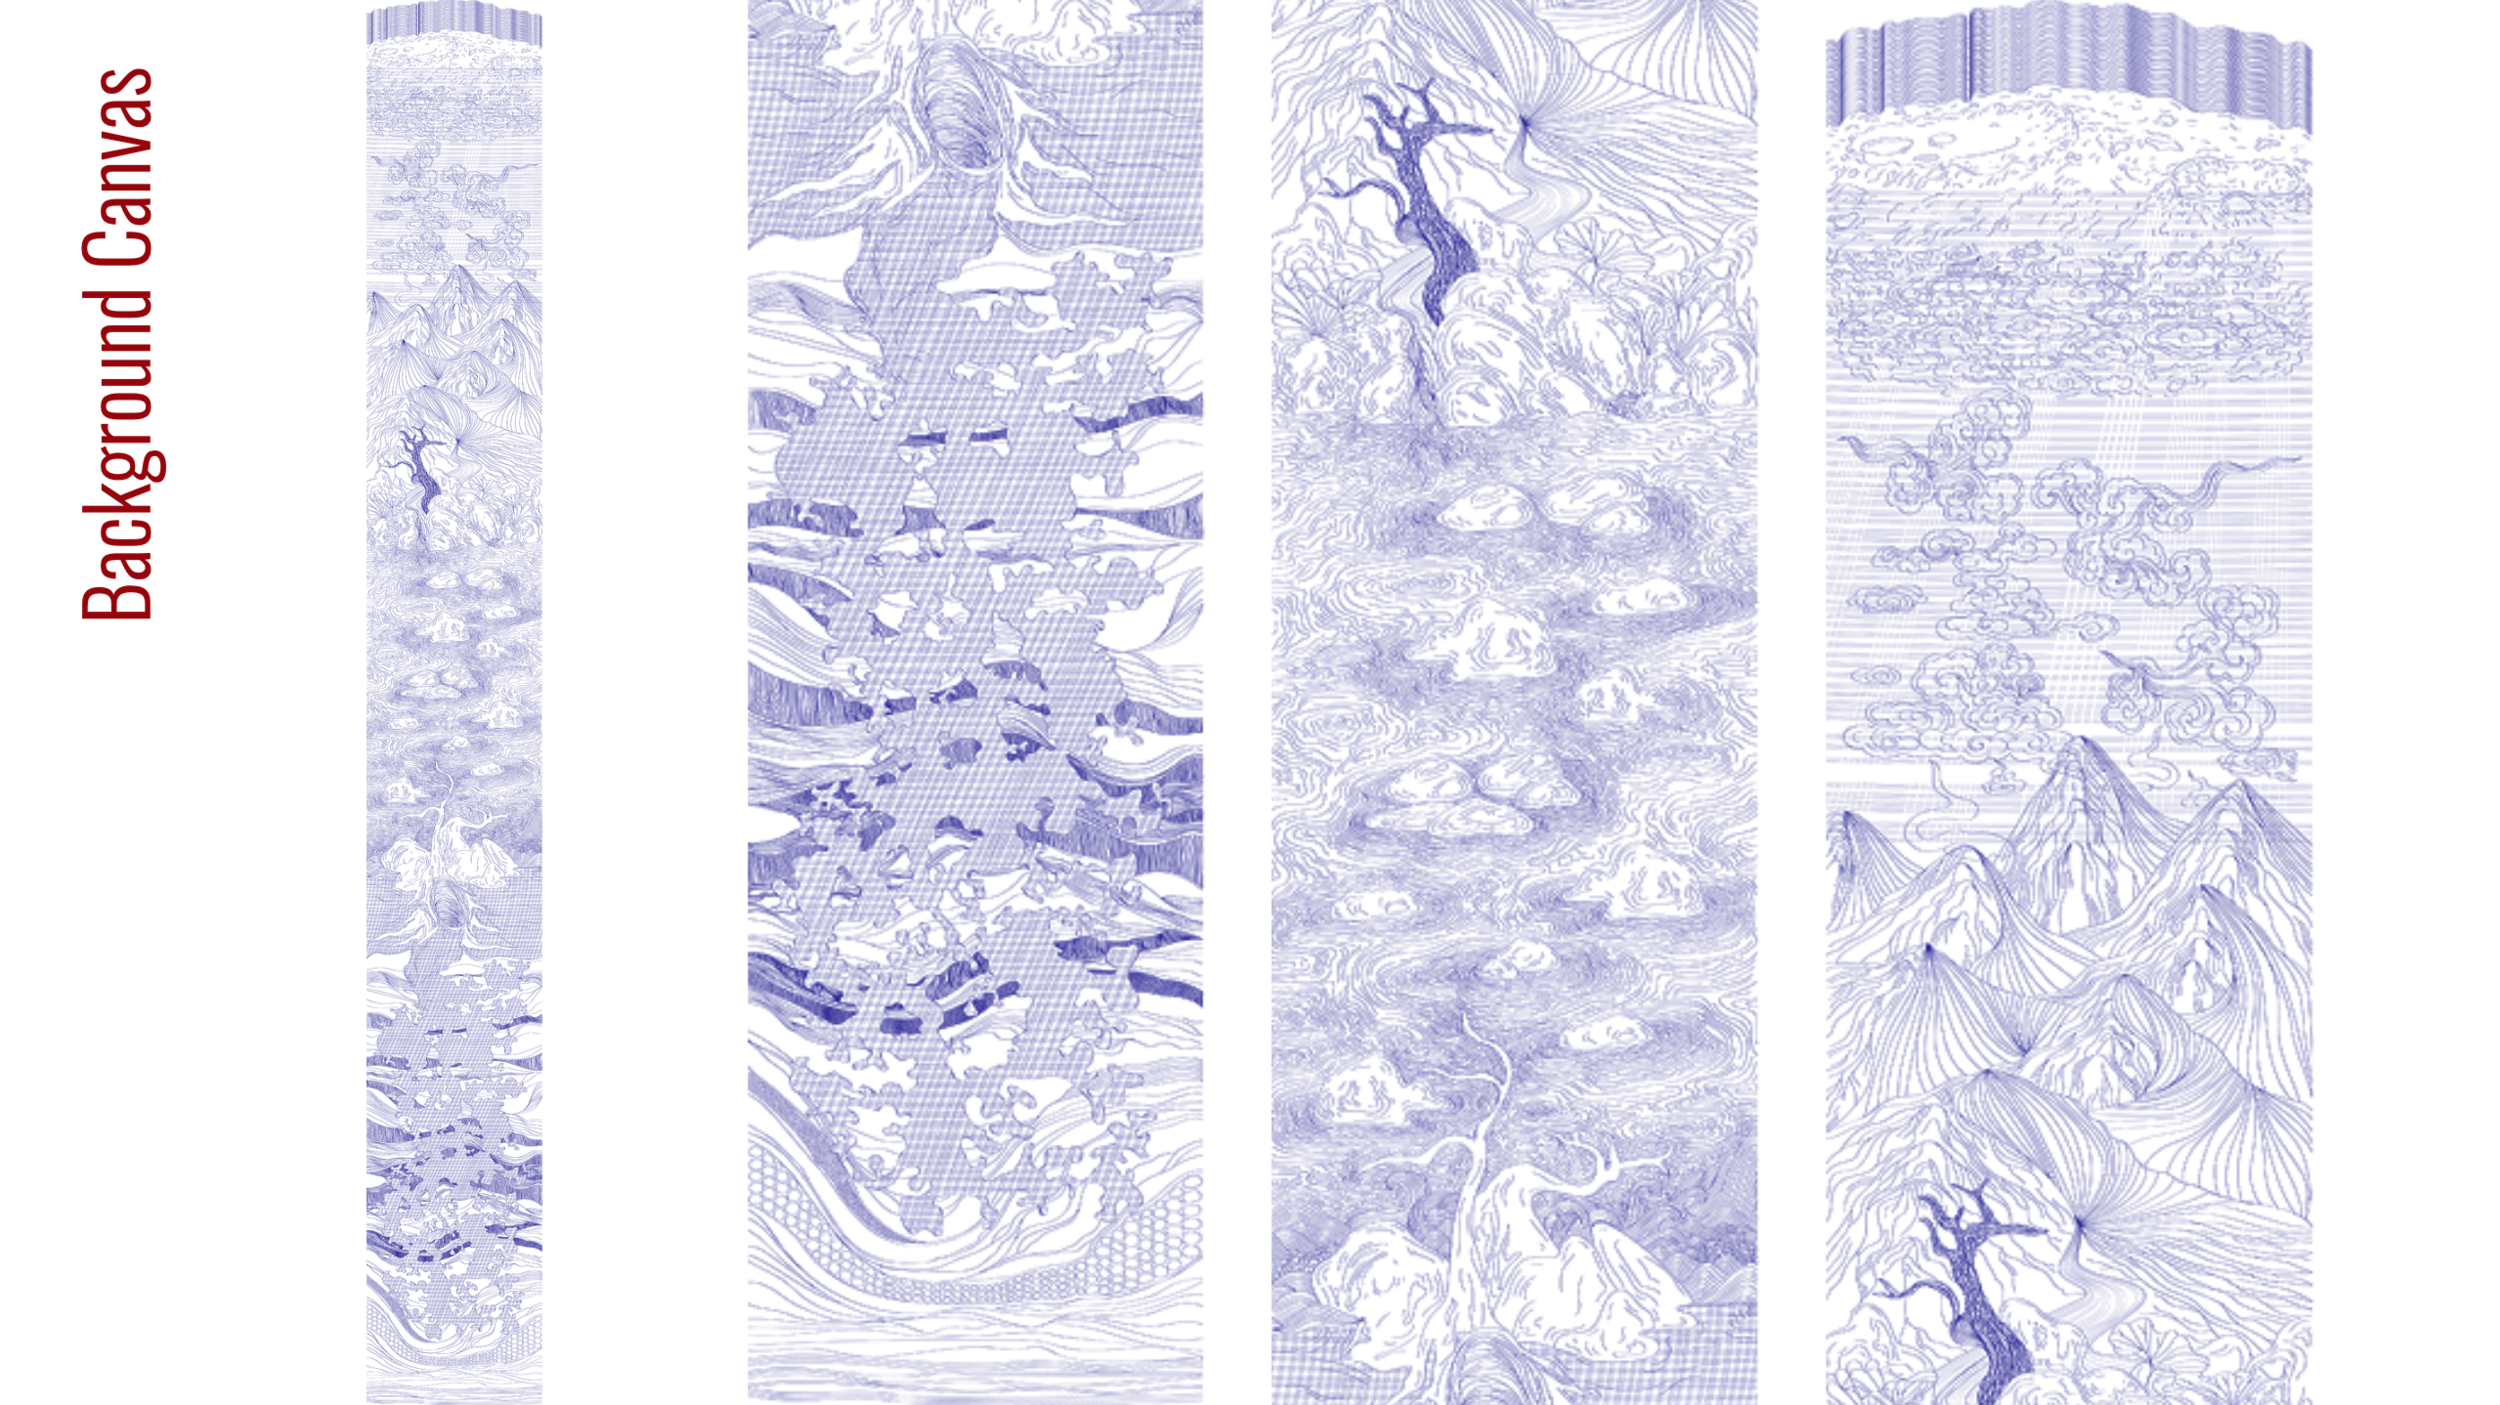   Illustration  decoded from the temple mural, drawn in vertical sequences. 